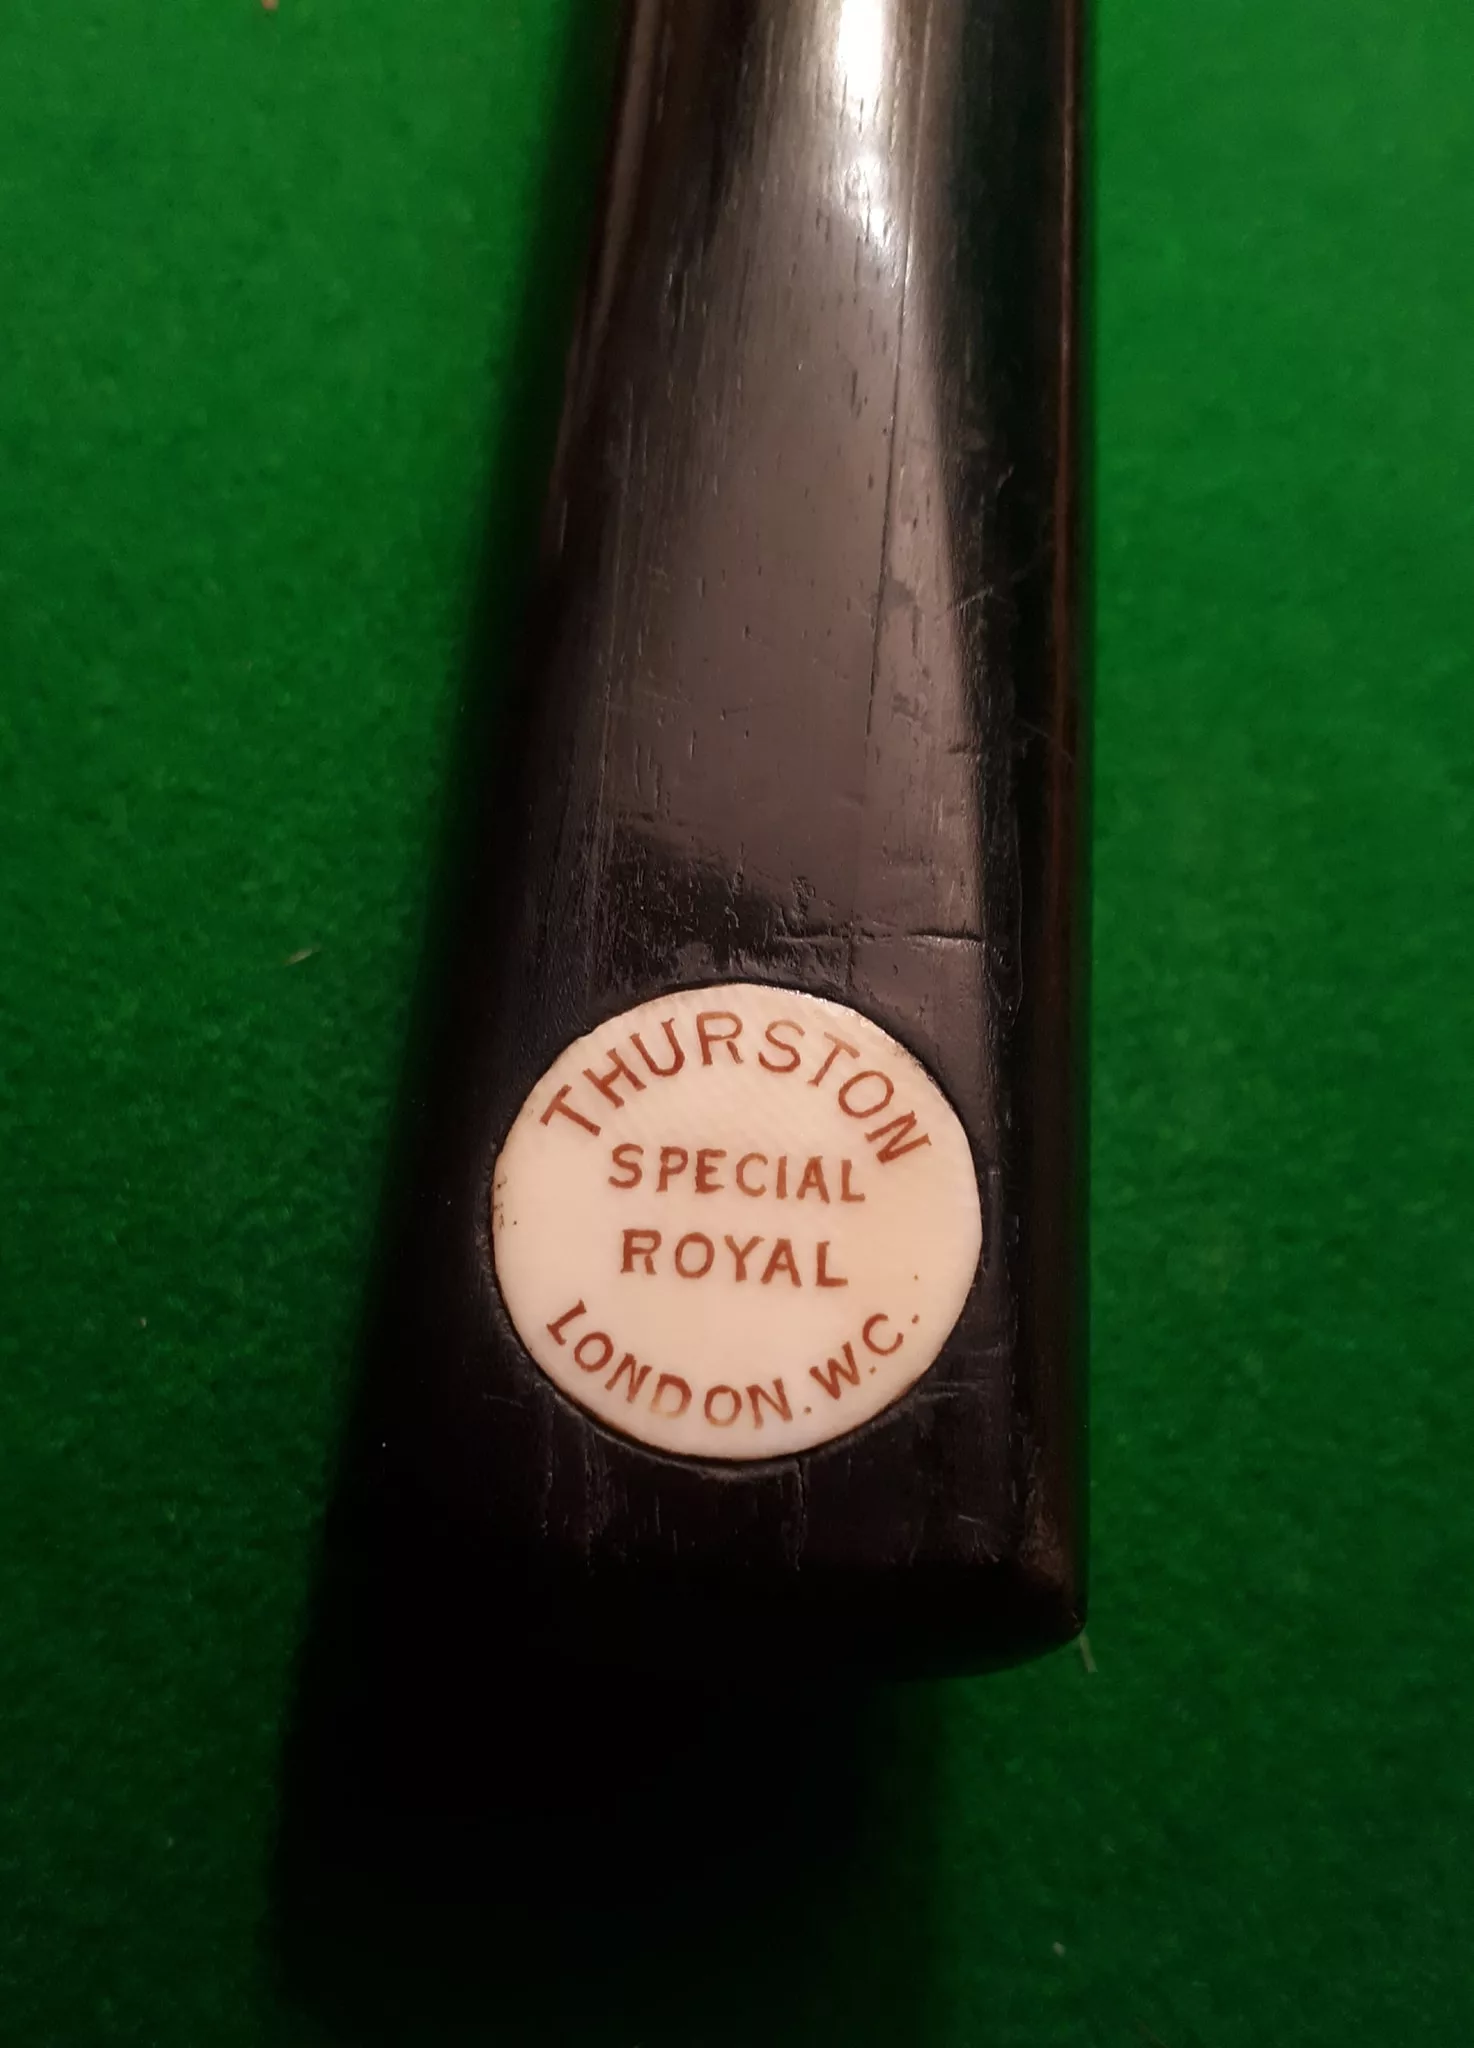 Thurston Special Royal cue